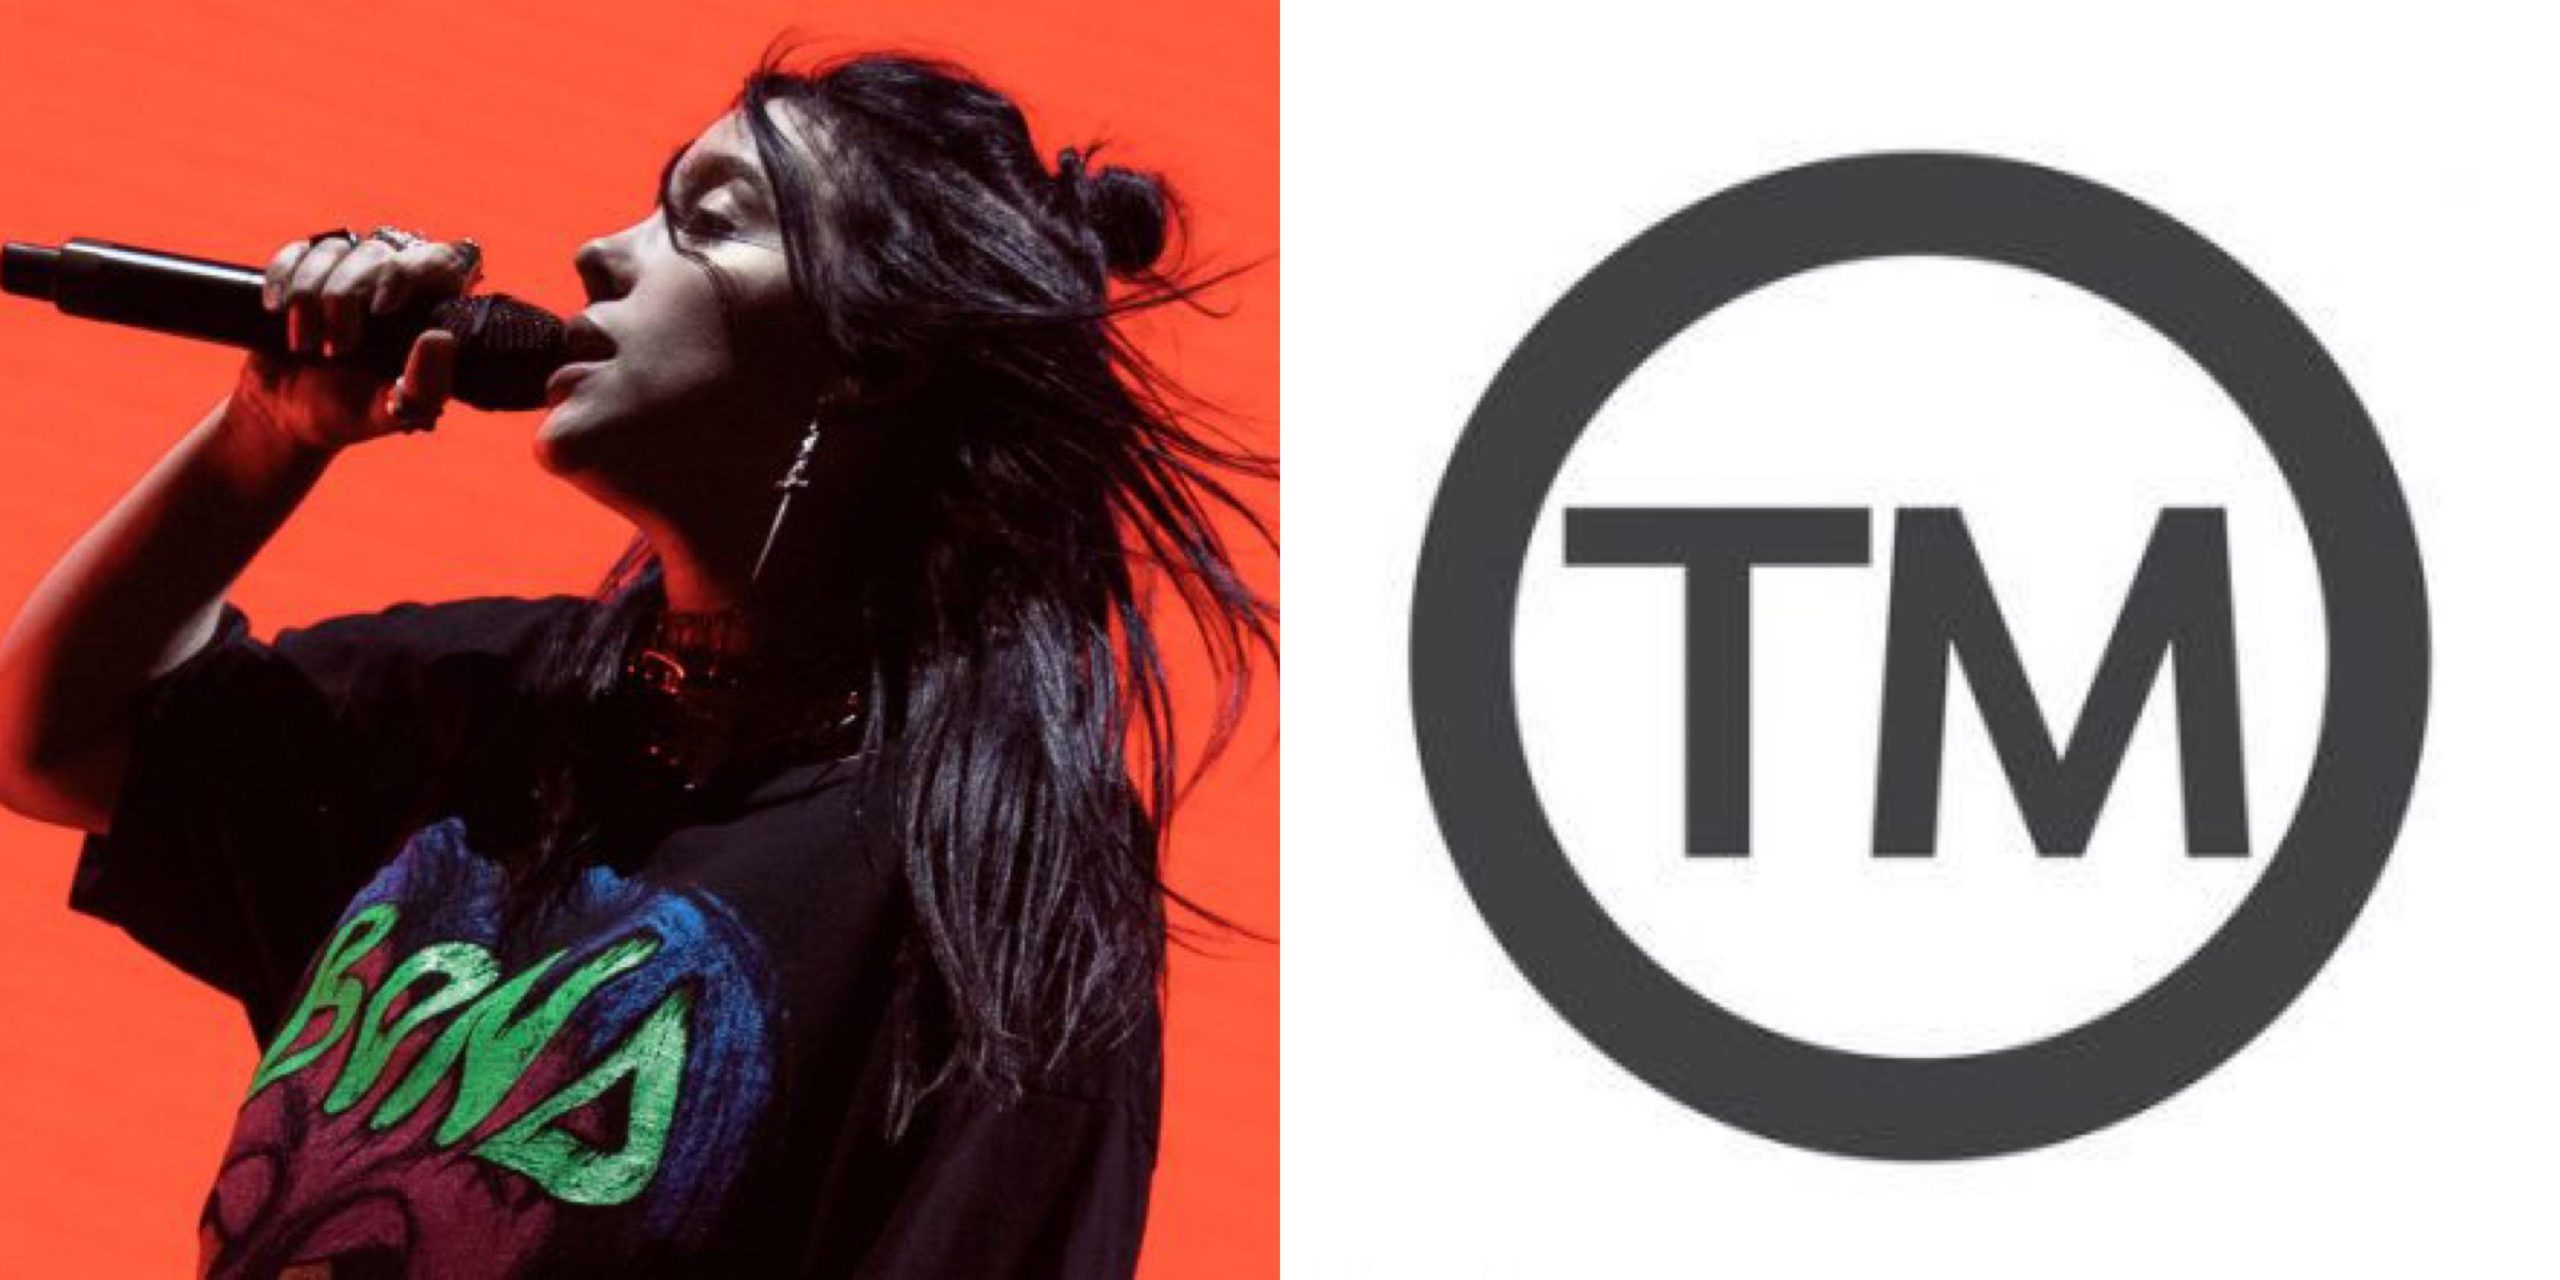 BILLIE EILISH FILES NFT AND METAVERSE RELATED TRADEMARKS